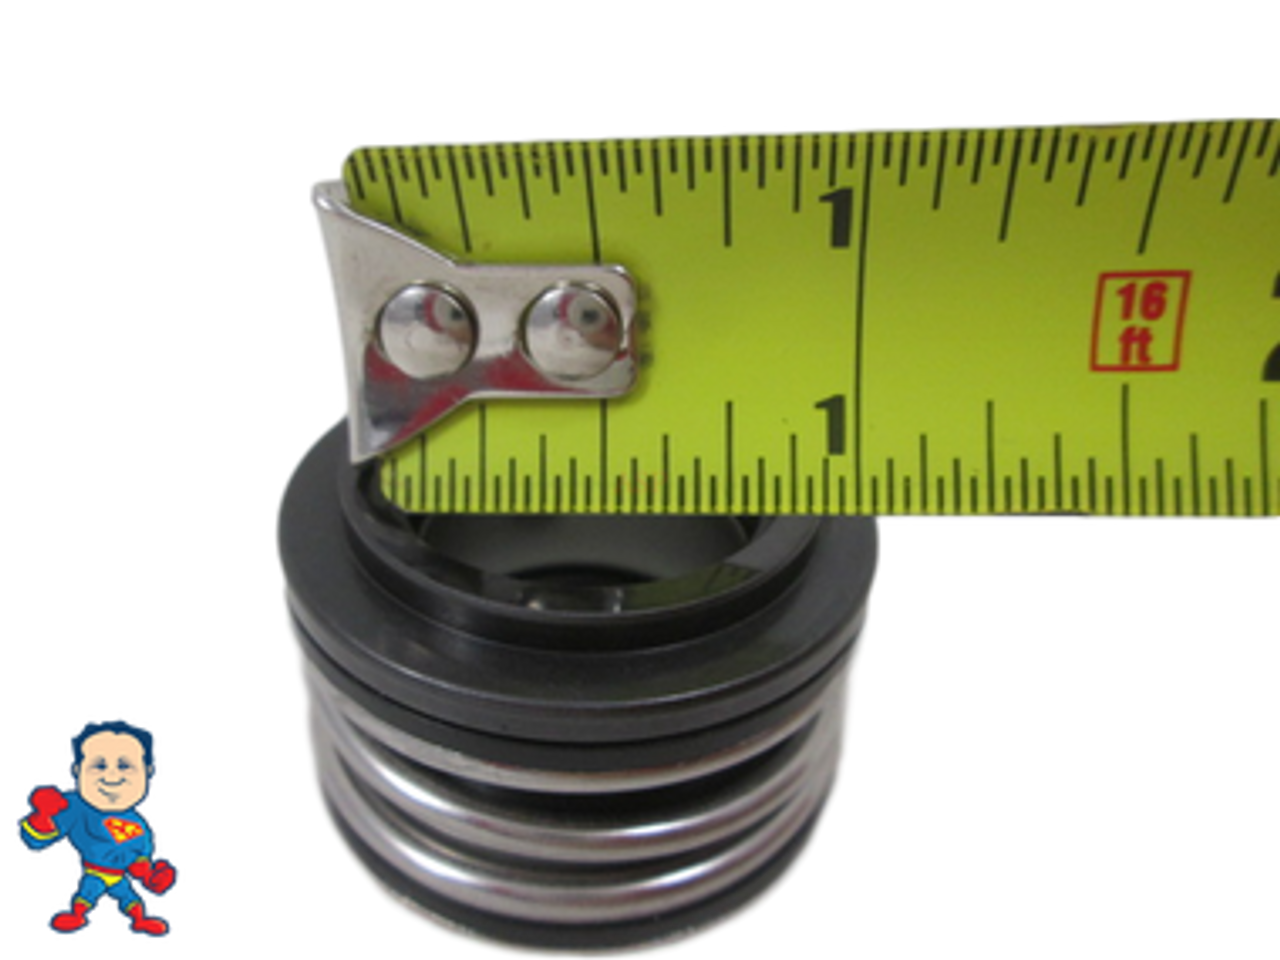 Shaft Seal, PS-1902, 3/4" Shaft, Silicon Carbide PS-201 (BEST) Fits Most Vico, Sta-Rite and Power Right Spa Pumps